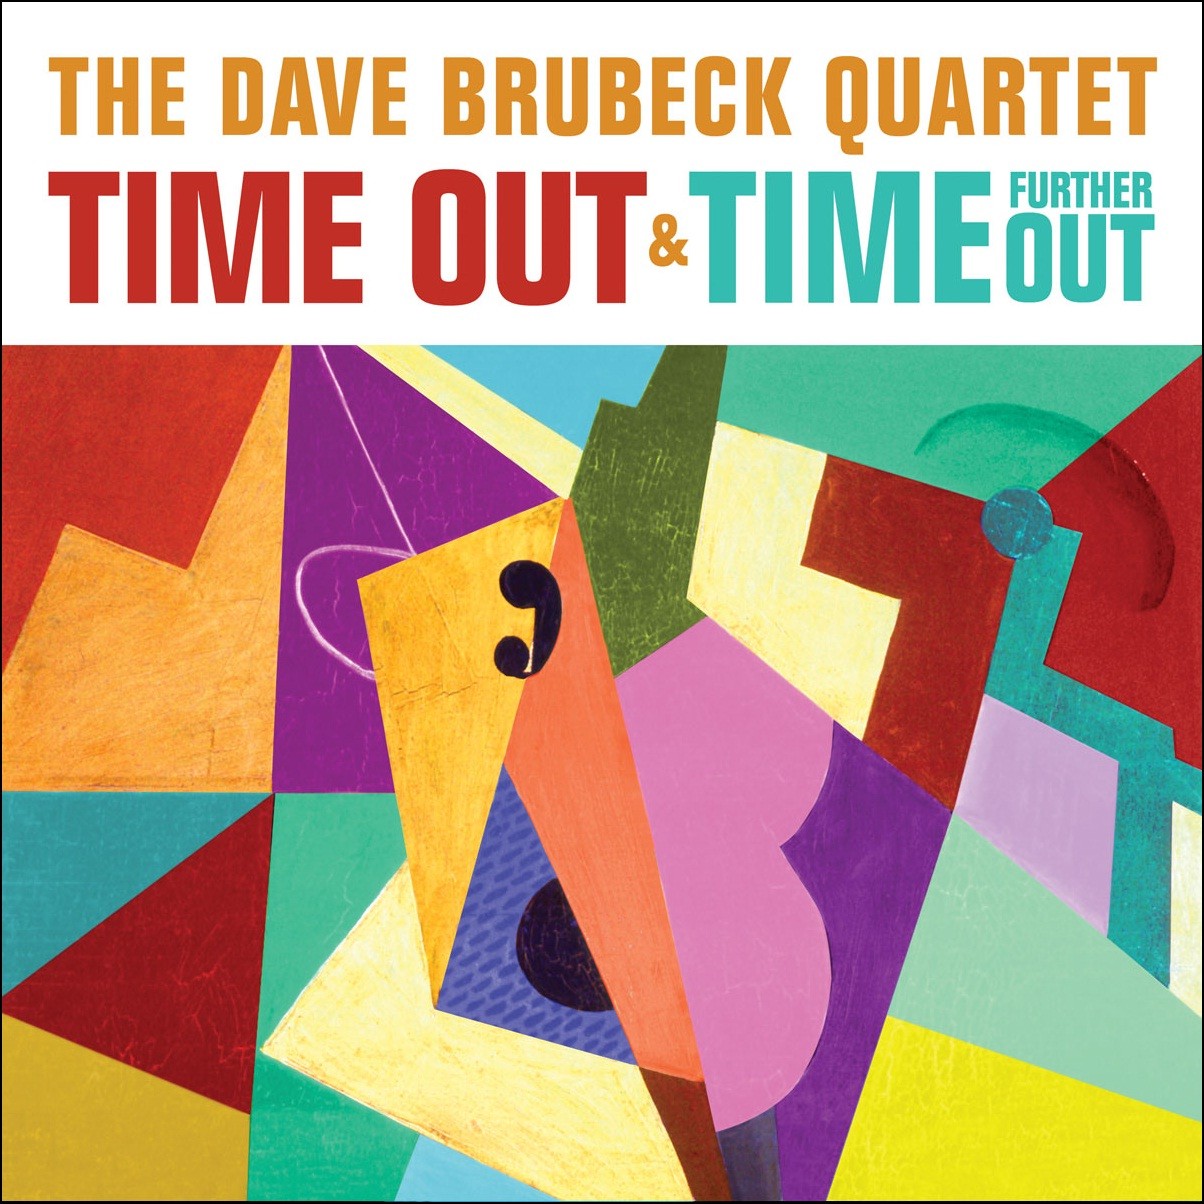 DAVE BRUBECK: Time Out & Time Further Out (2 180 GRAM VINYL LPS)